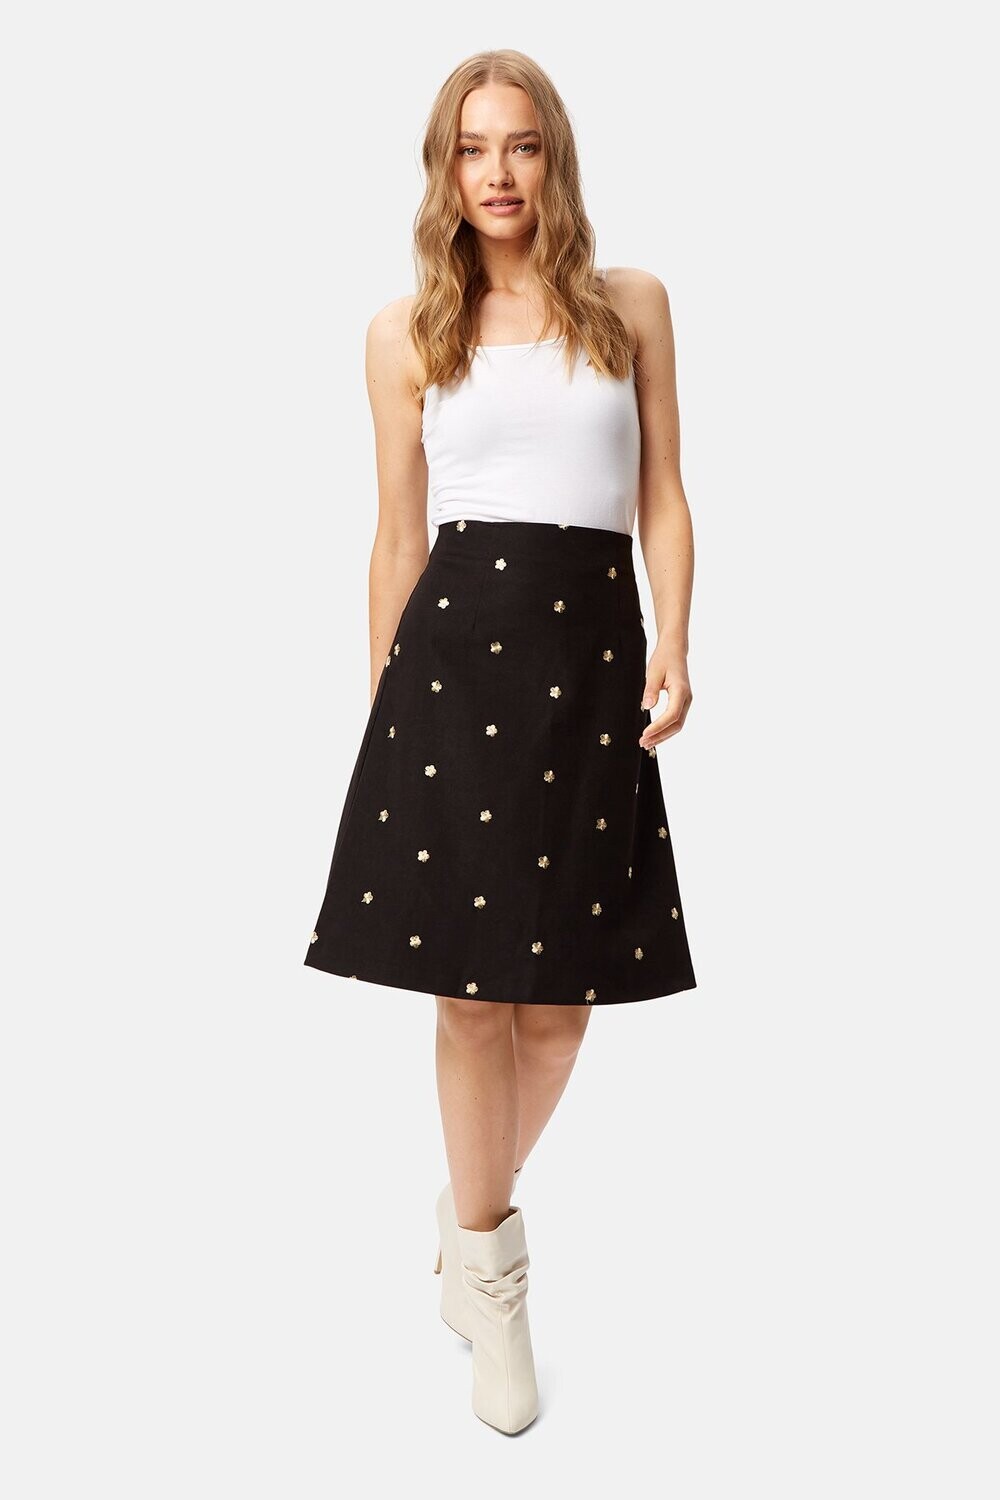 TRAFFIC PEOPLE Marge Duval A Line Skirt Black